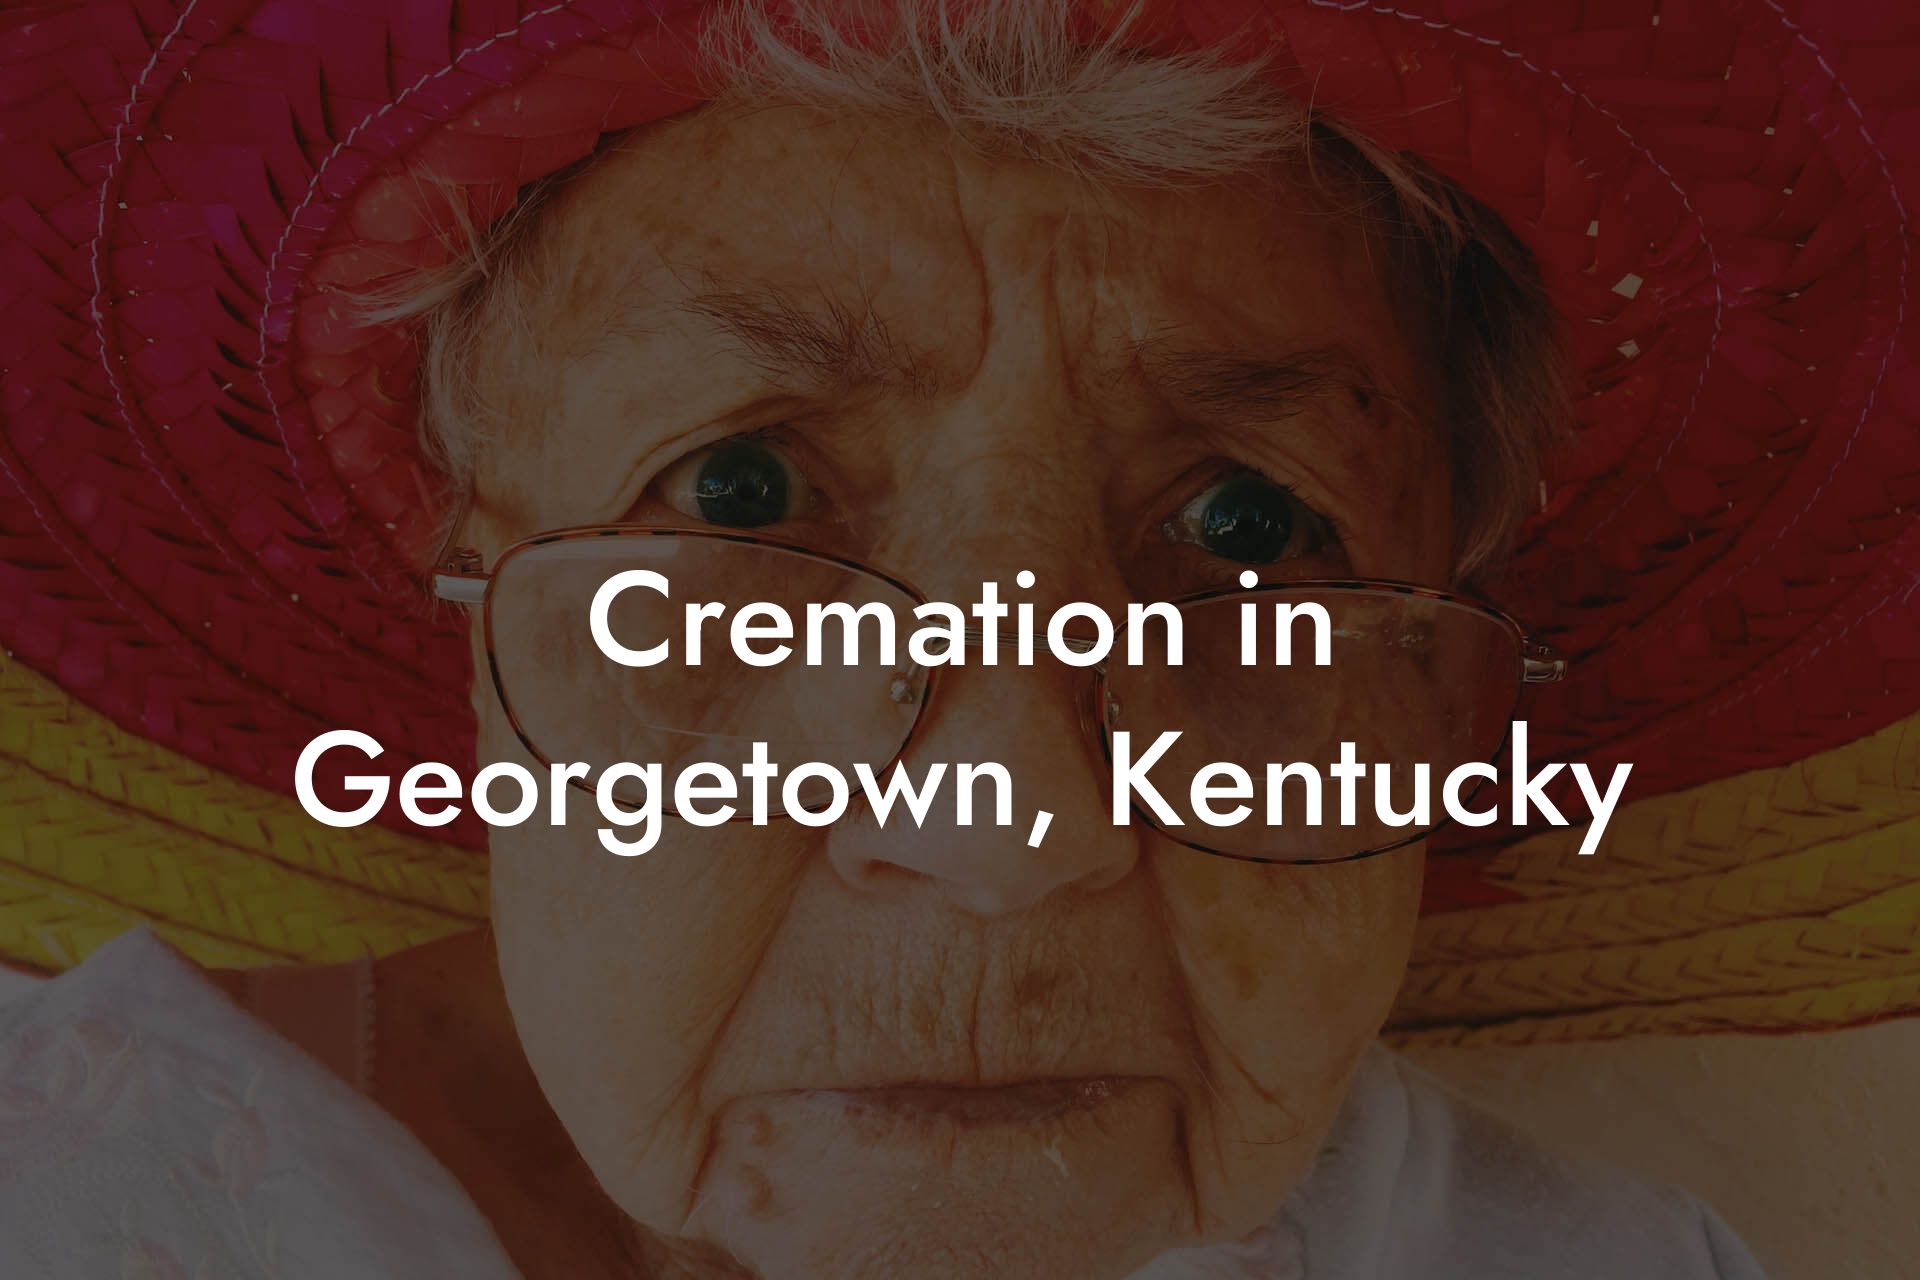 Cremation in Georgetown, Kentucky